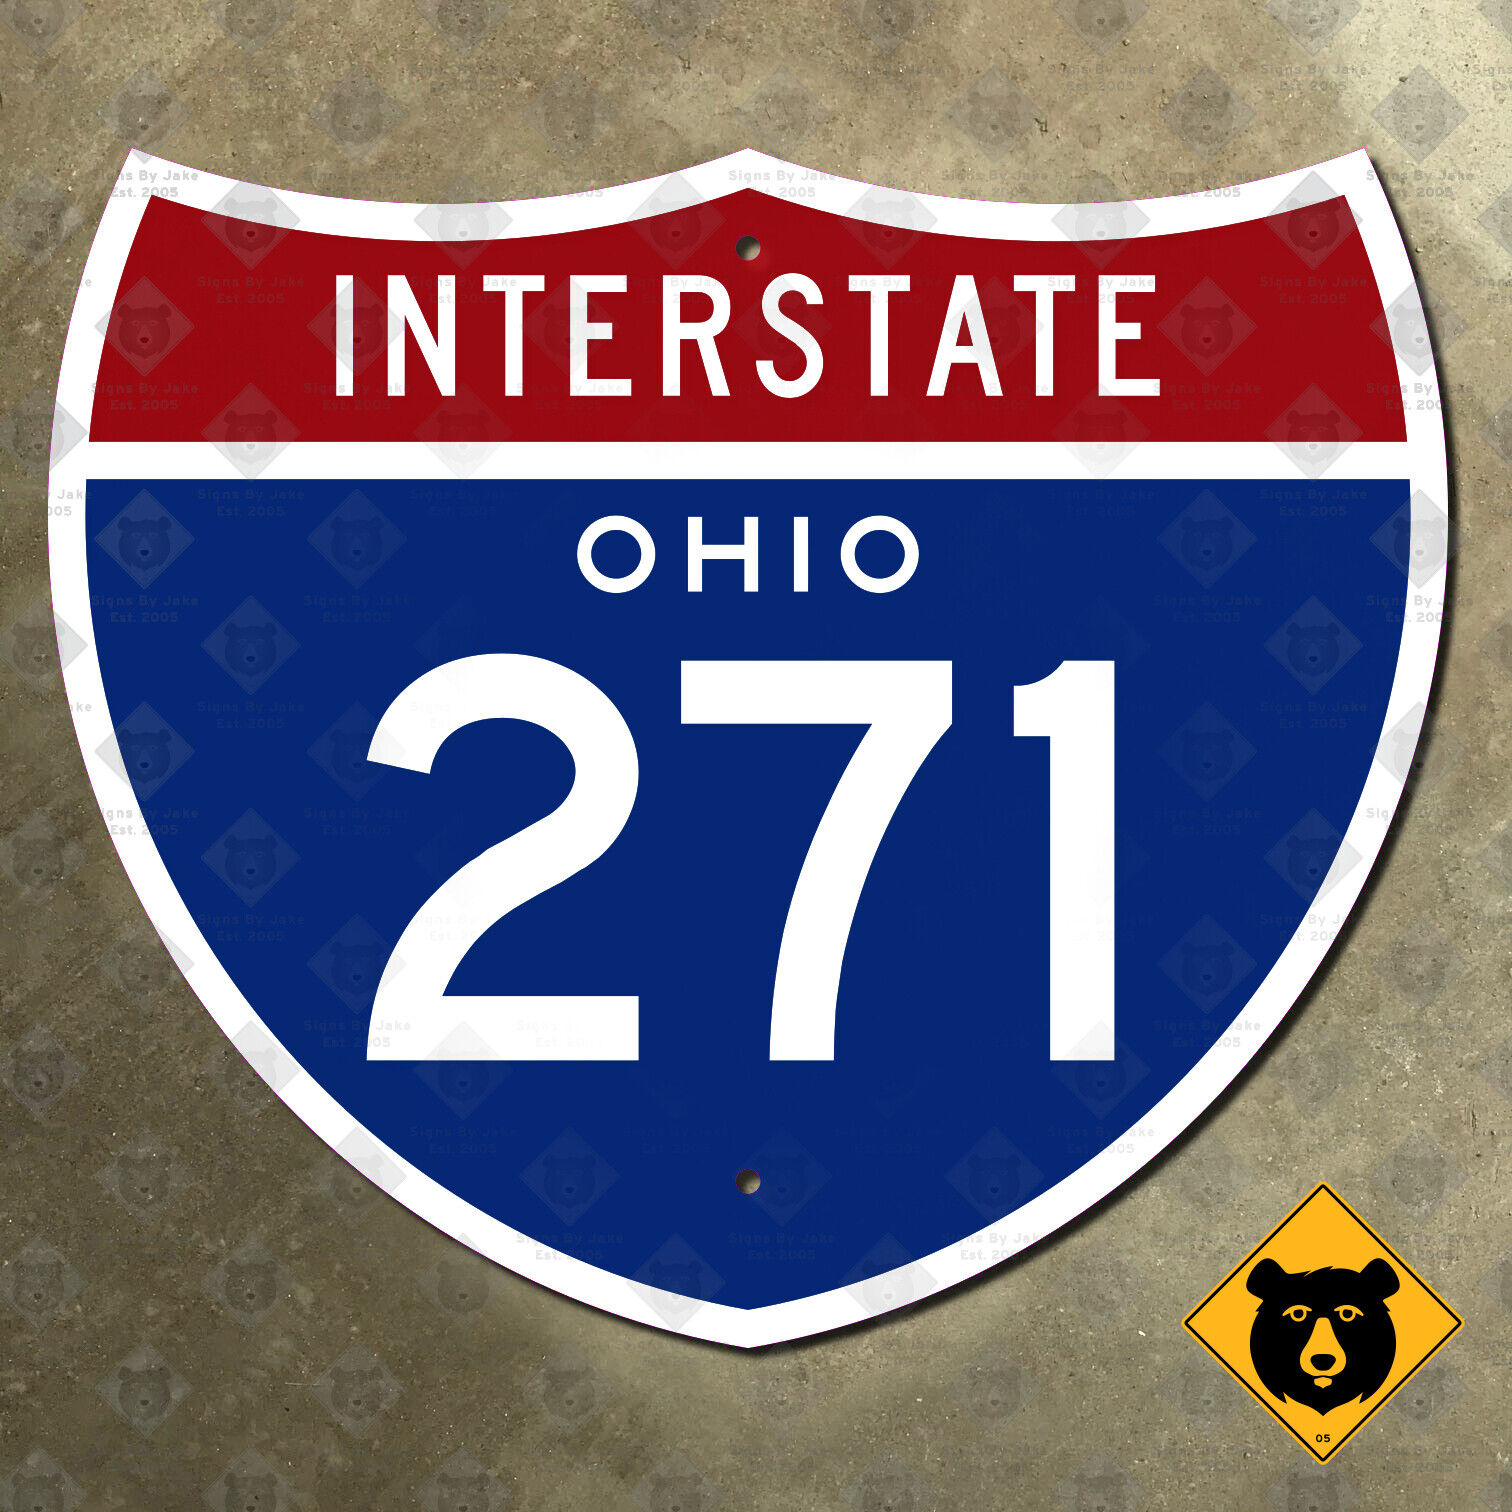 Ohio Interstate 271 highway route sign 1957 Cleveland Akron 21x18